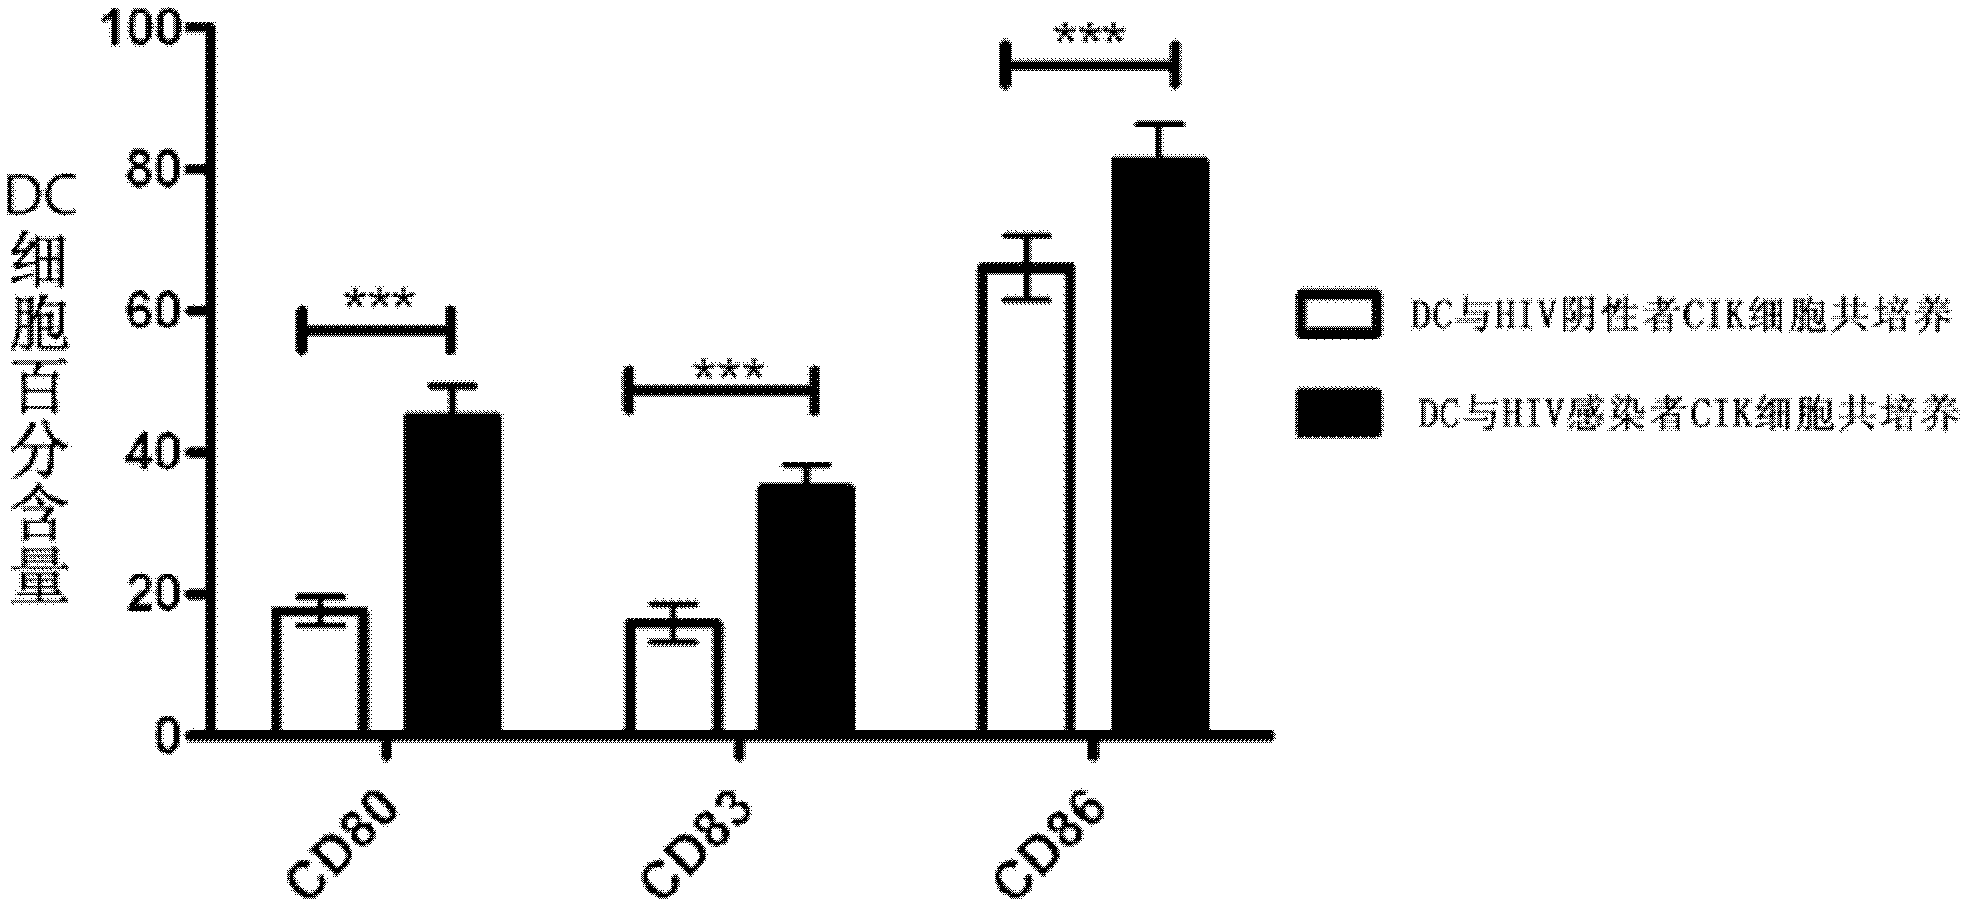 Application of DC-CIK (Dendritic Cell-Cytokine-Induced Killer) cells in preparation of medicine used for resisting HIV (Human Immunodeficiency Virus) infection